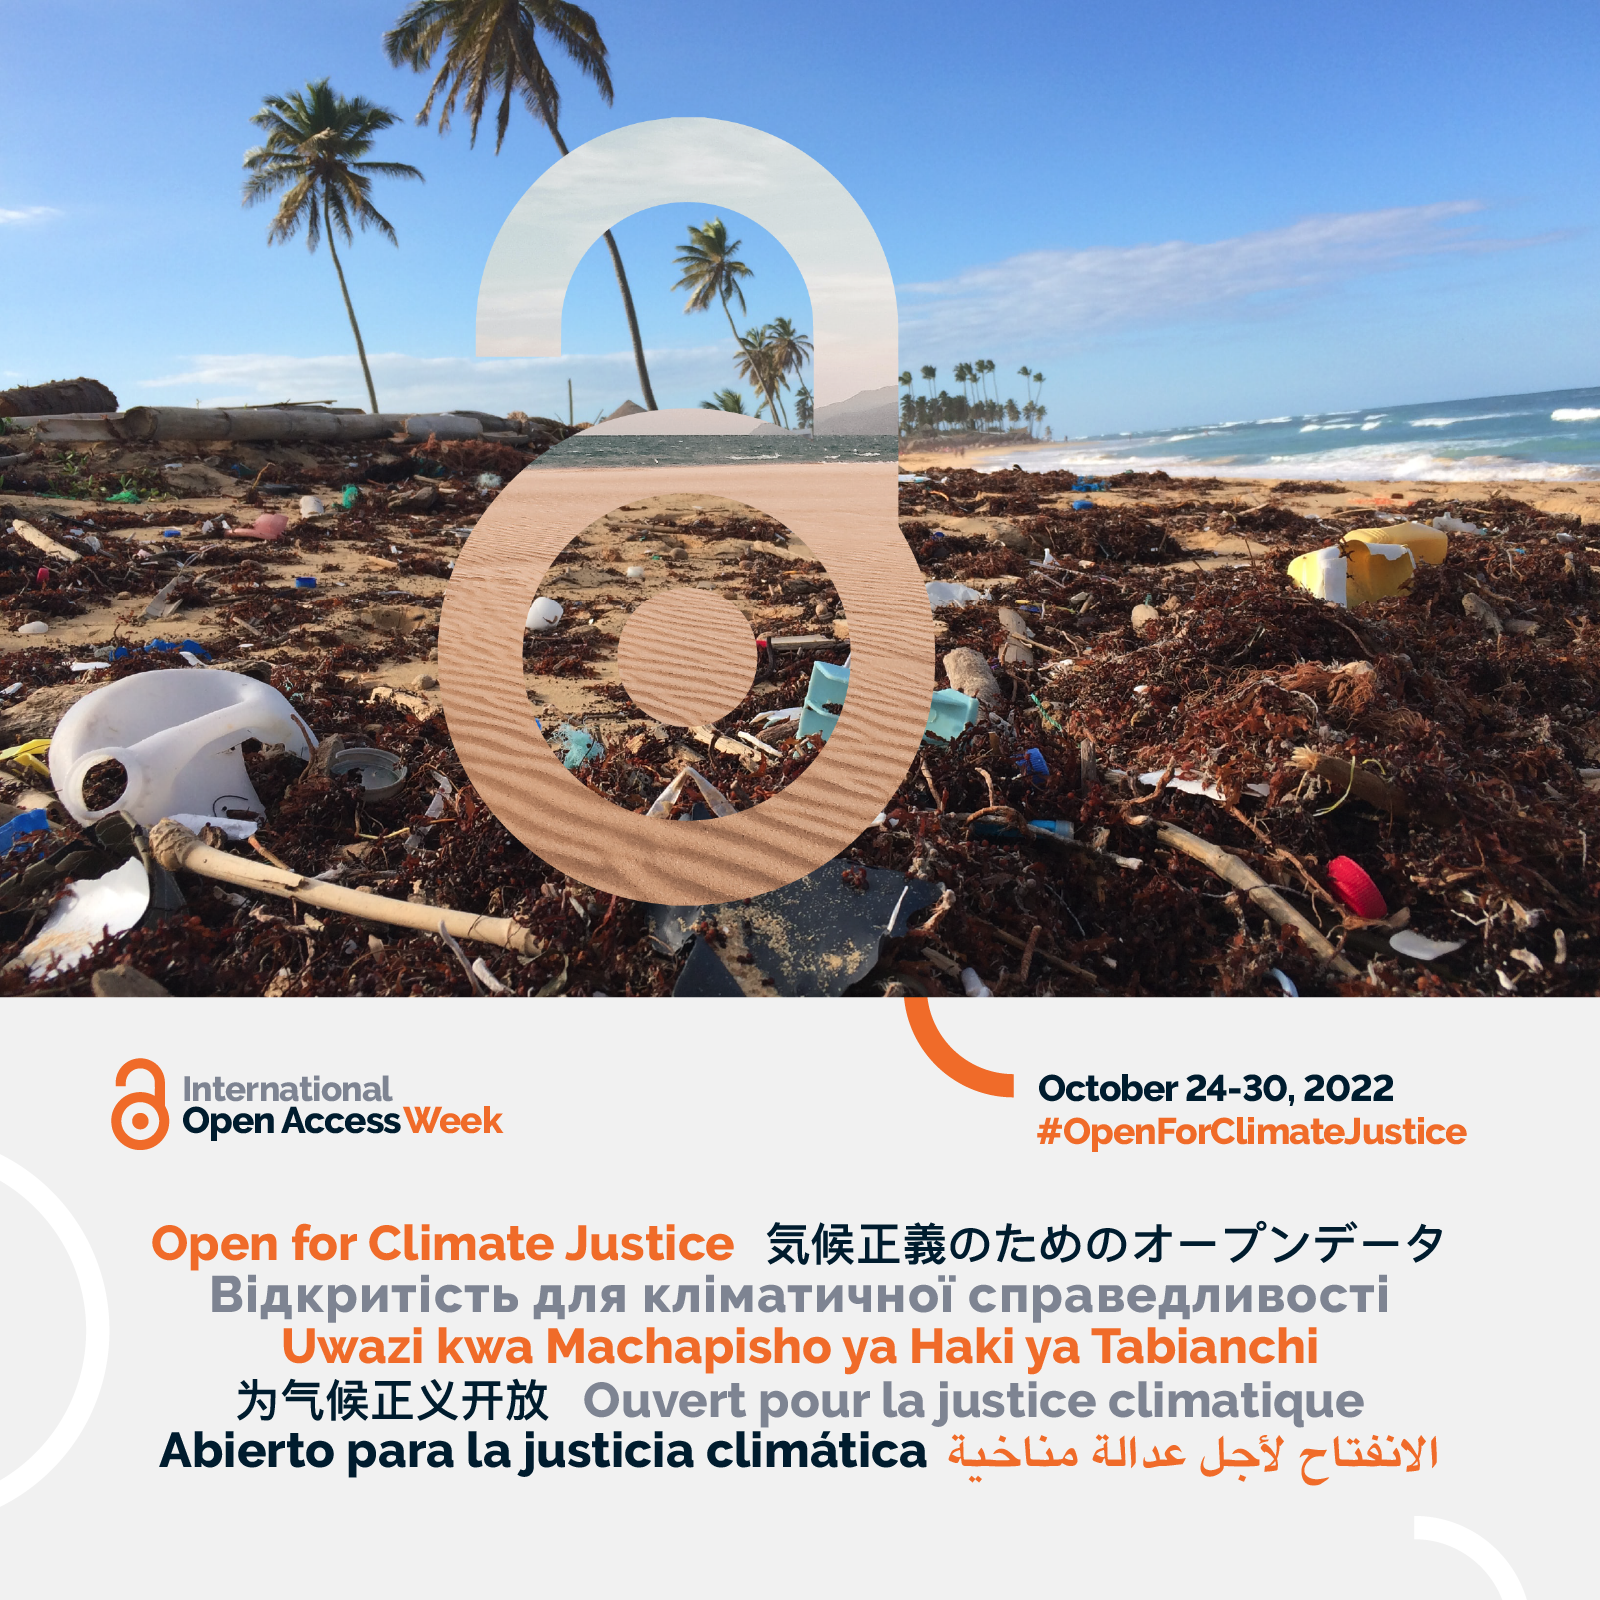 Image shows polluted beach with text reading 'open access week 2022' in various languages written underneath